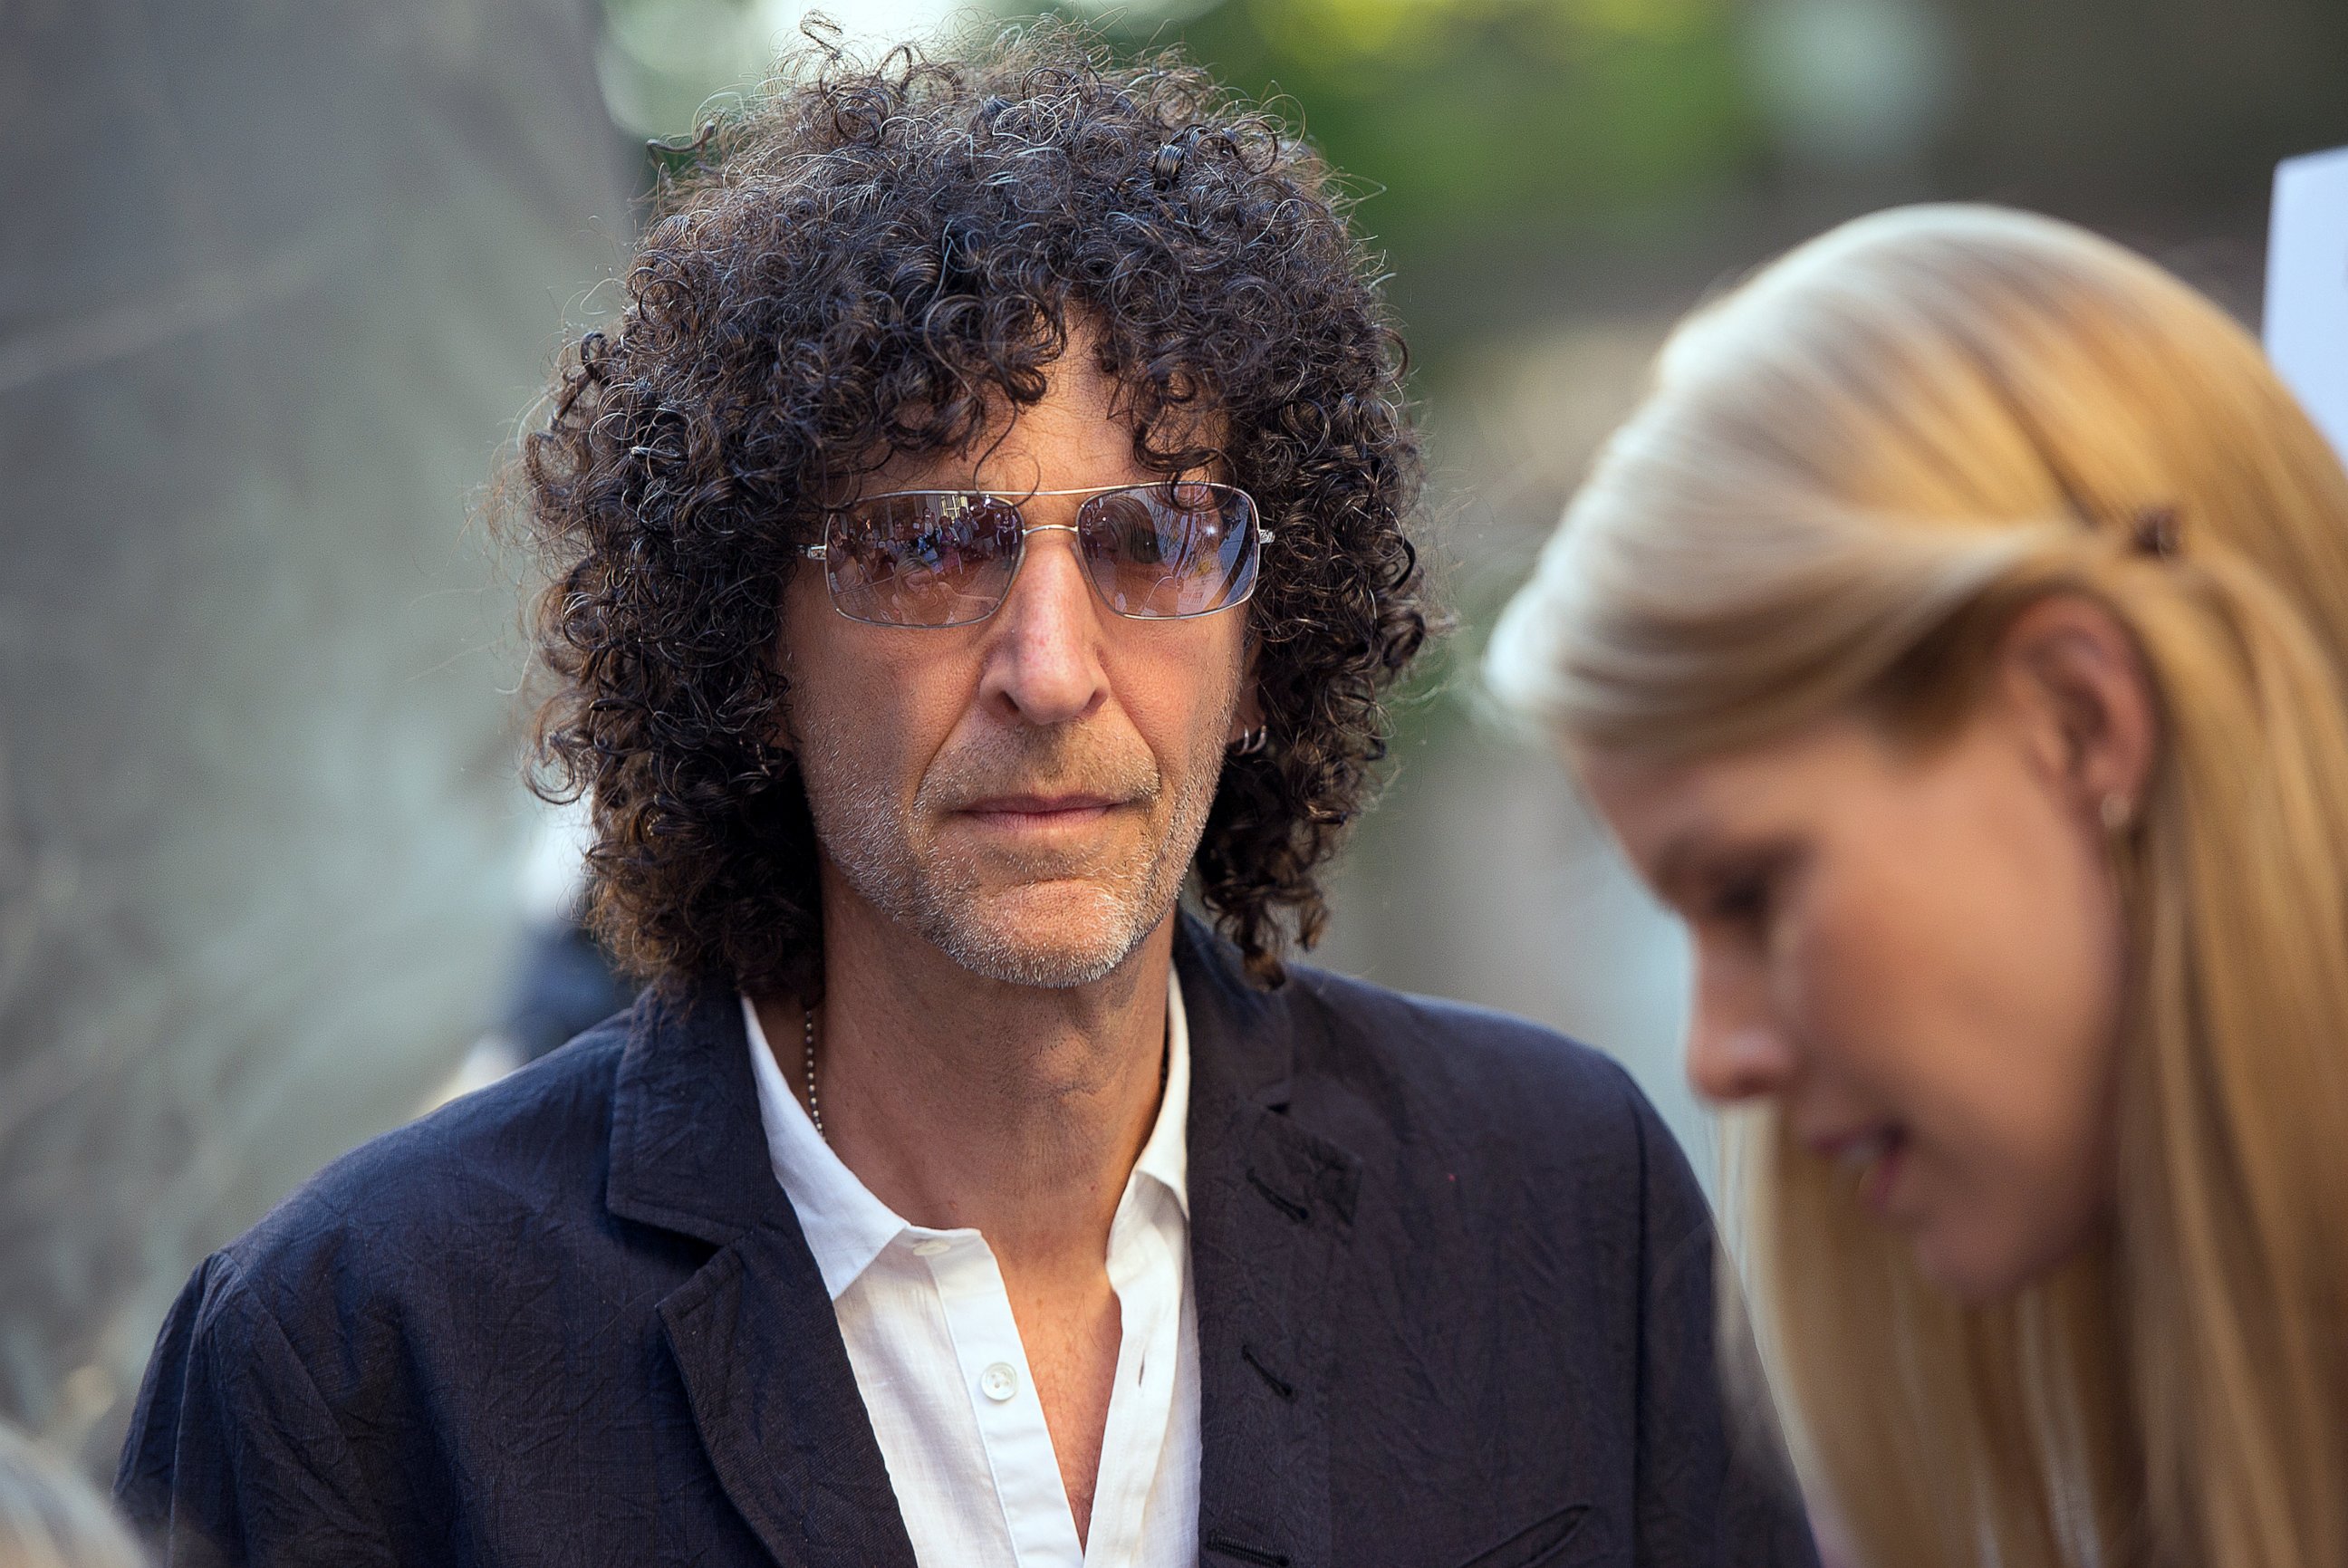 PHOTO: Howard Stern and Beth Stern attend a "Mission Impossible: Rogue Nation" screening on July 24, 2015 in East Hampton, New York.